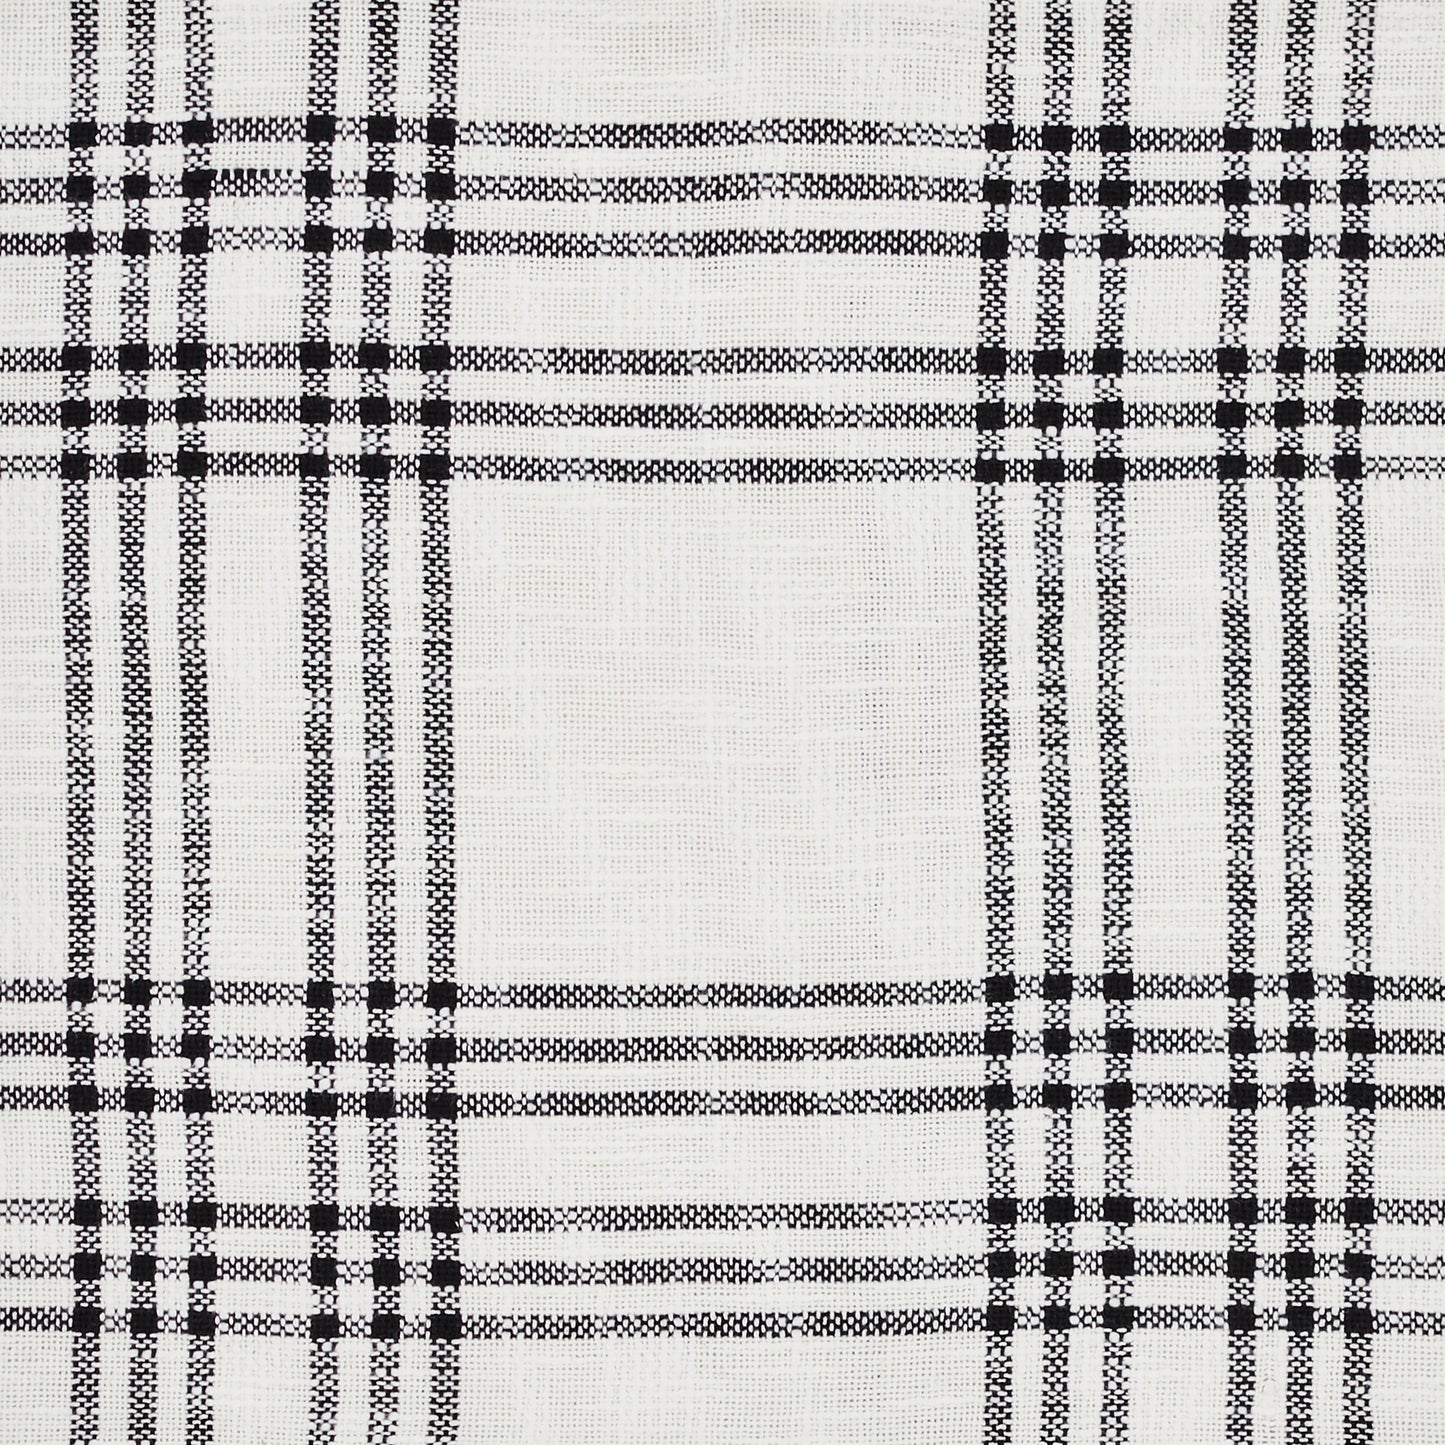 Black Plaid Woven Blanket Zoomed In